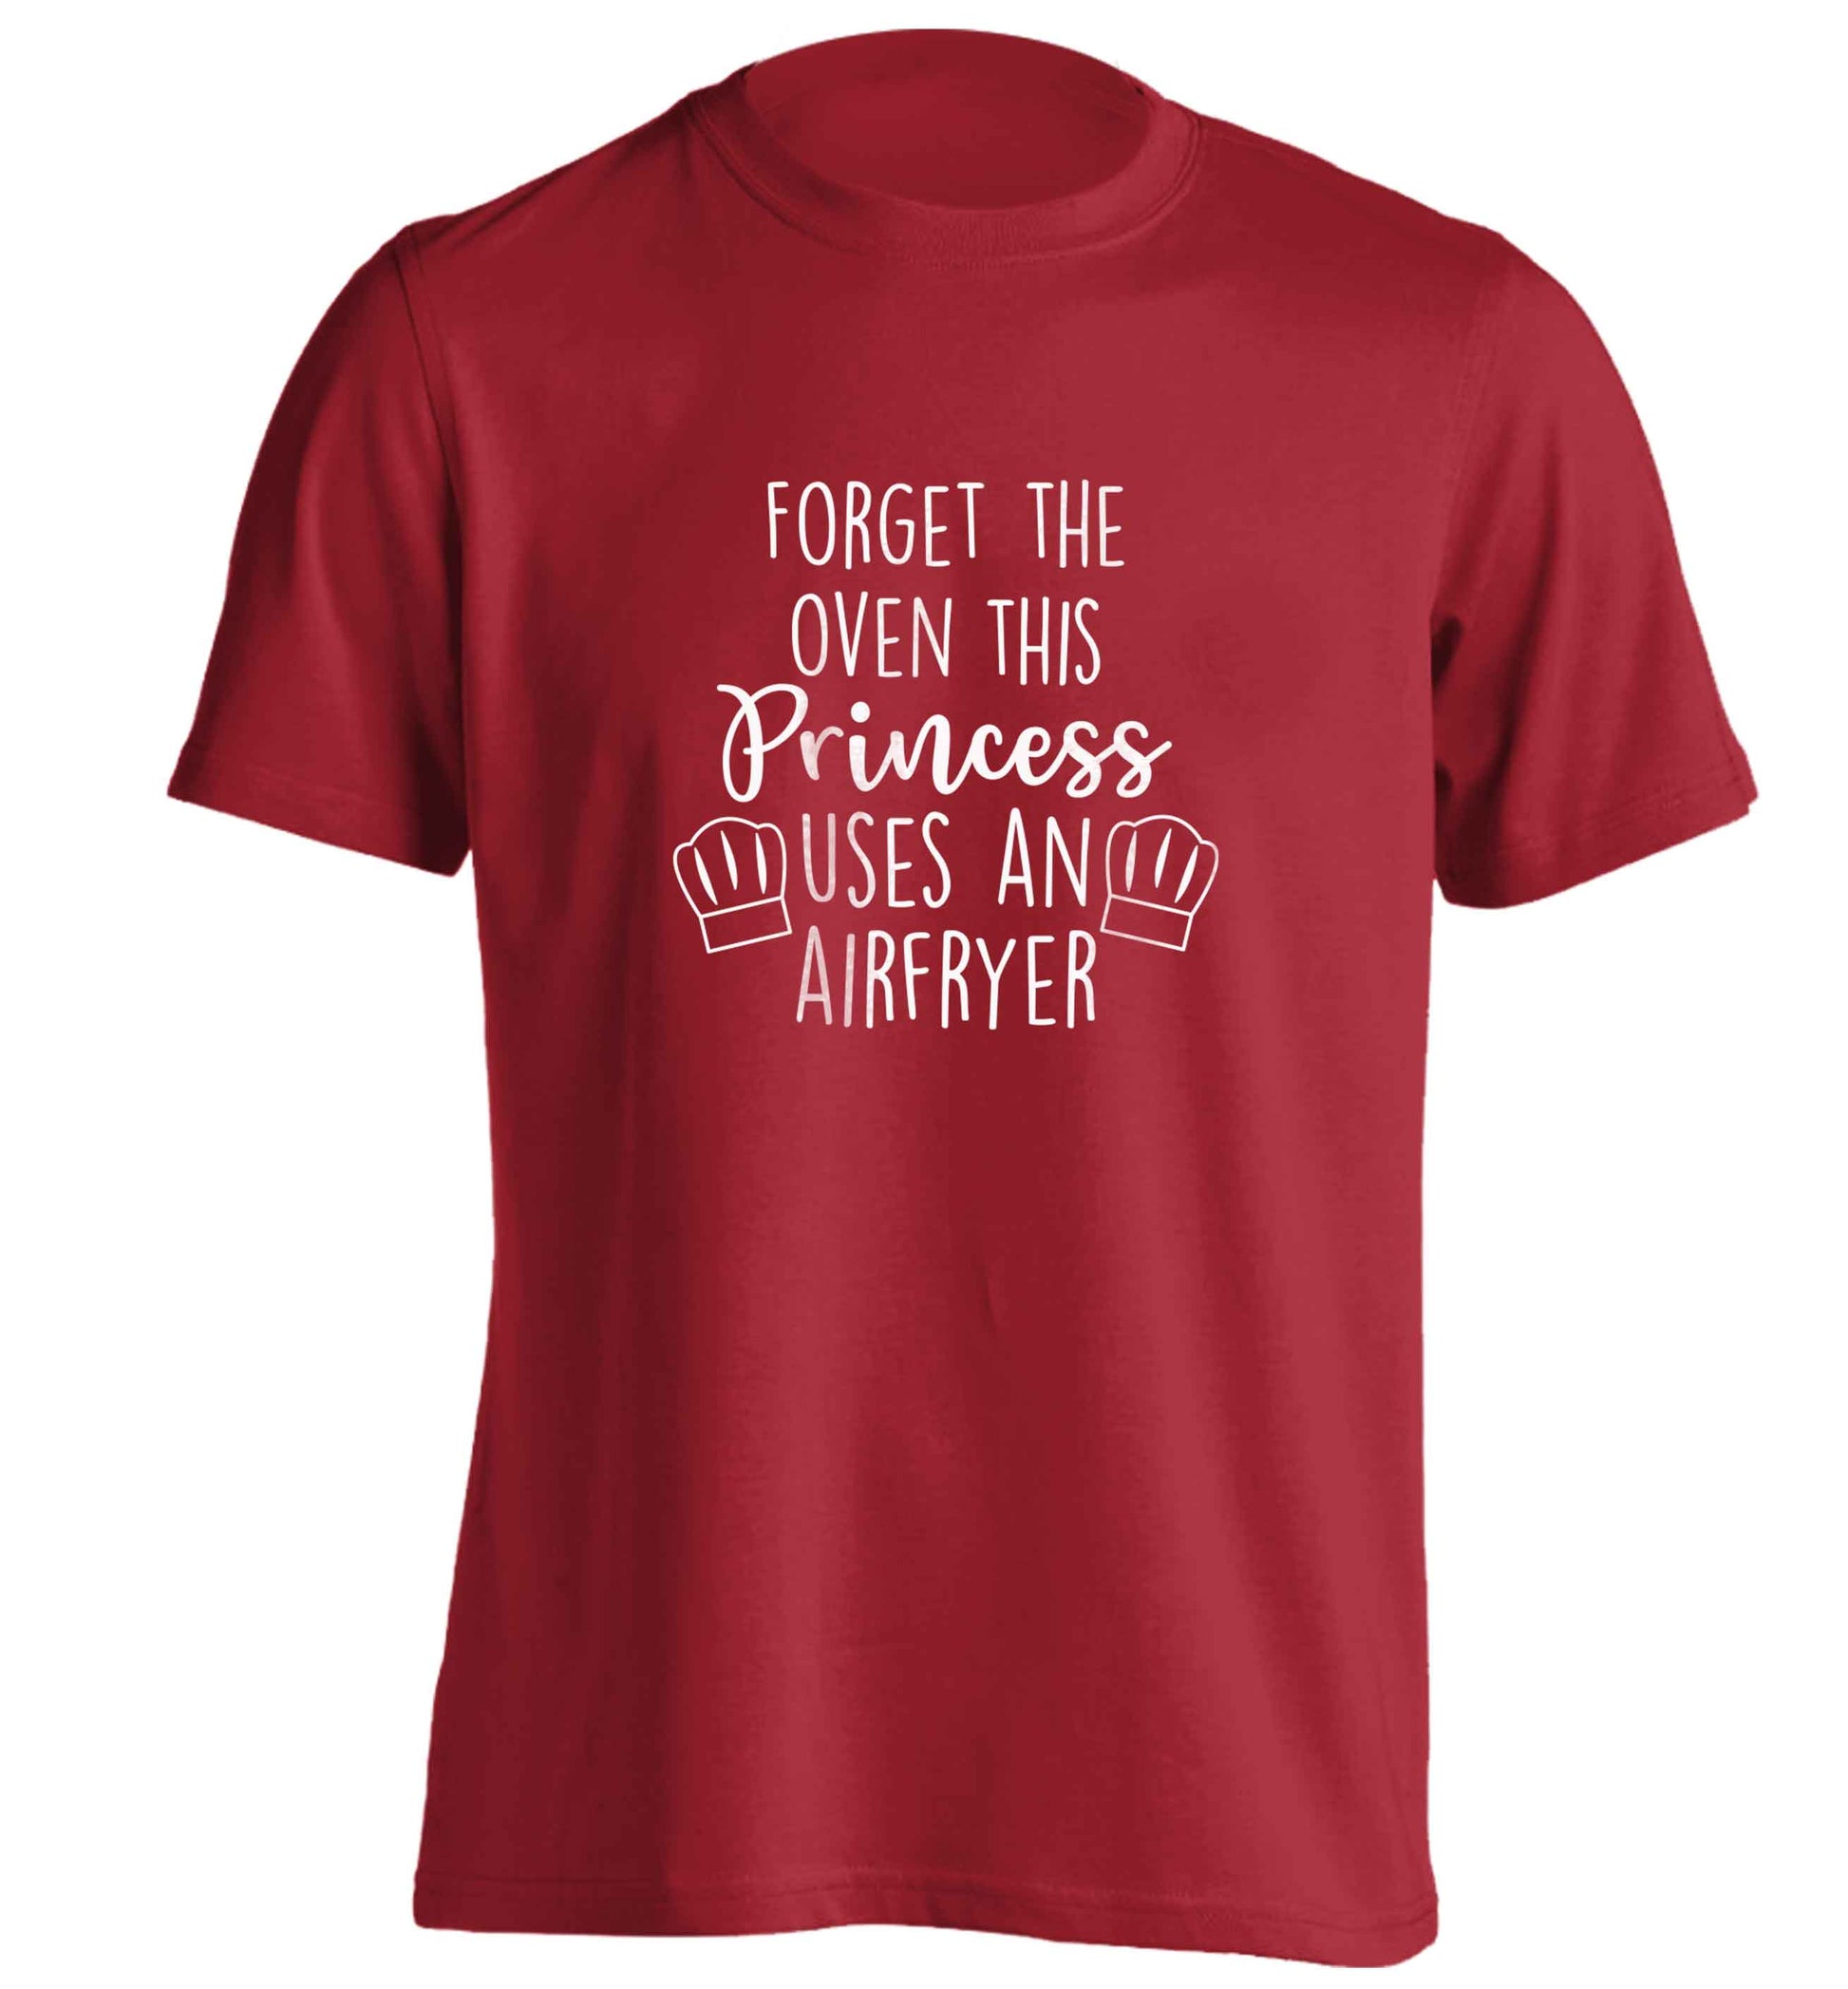 Forget the oven this princess uses an airfryeradults unisex red Tshirt 2XL